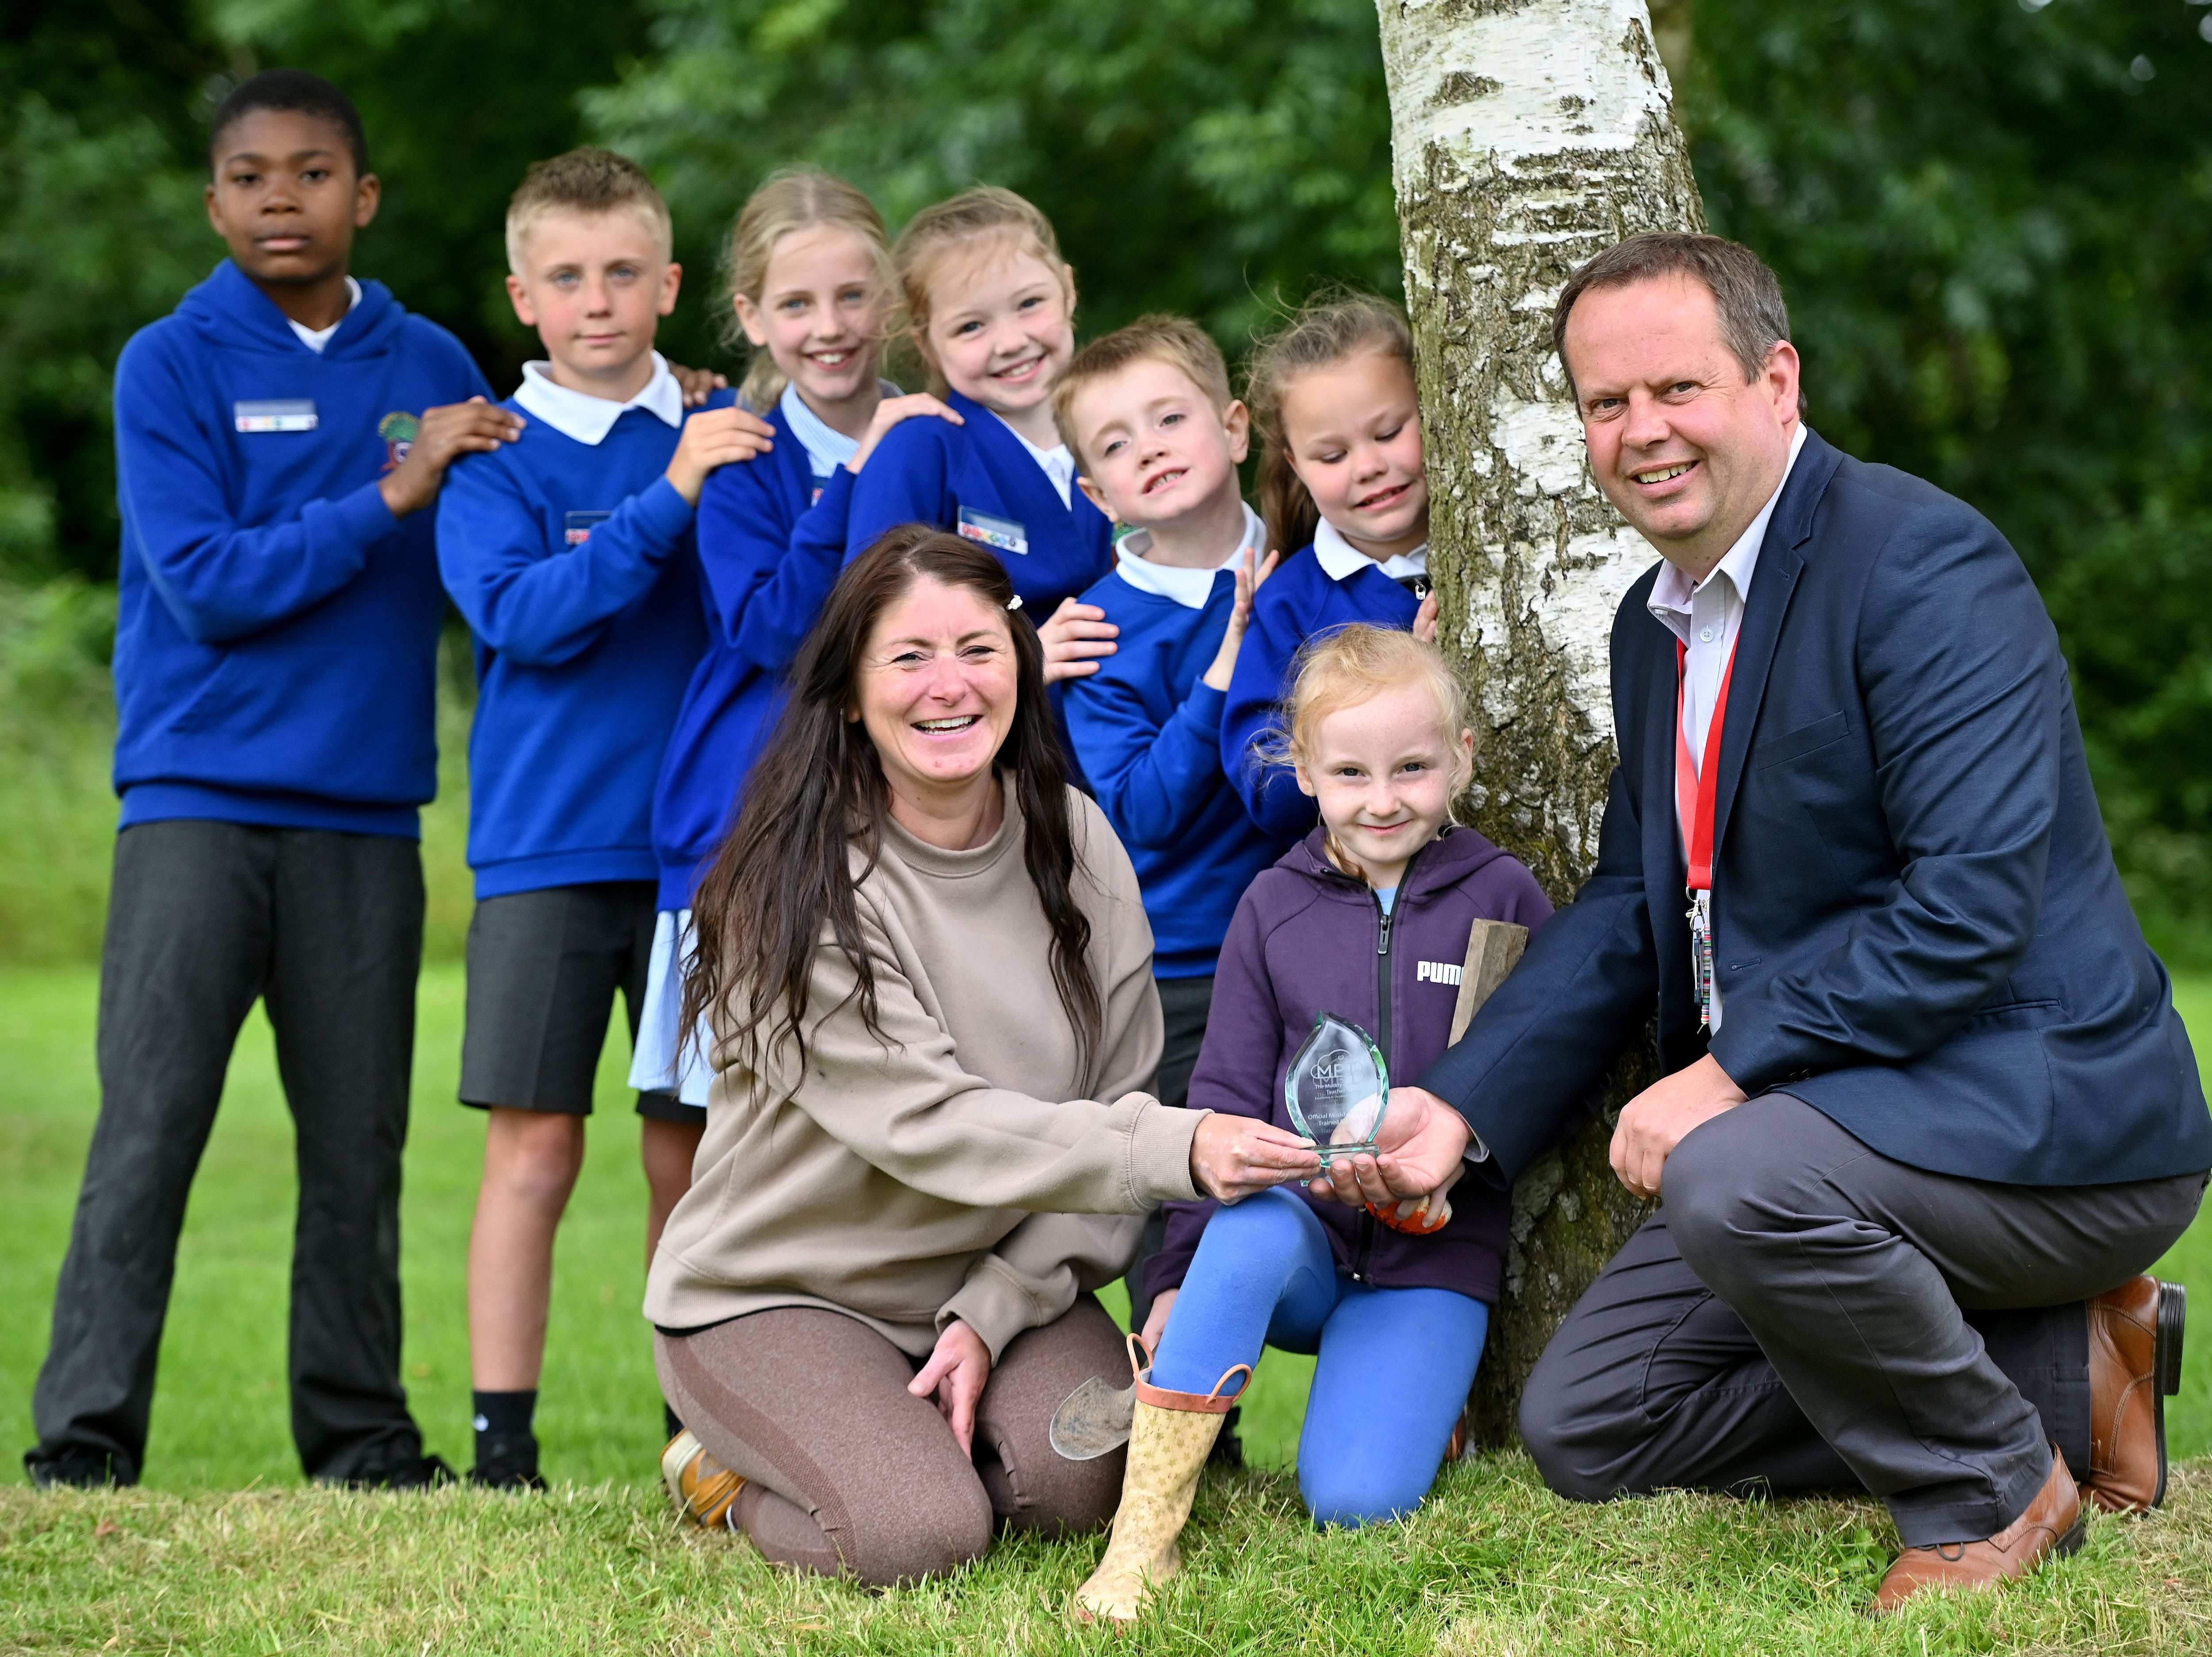 Staffordshire school launches 'groundbreaking' natural curriculum and wins special award

